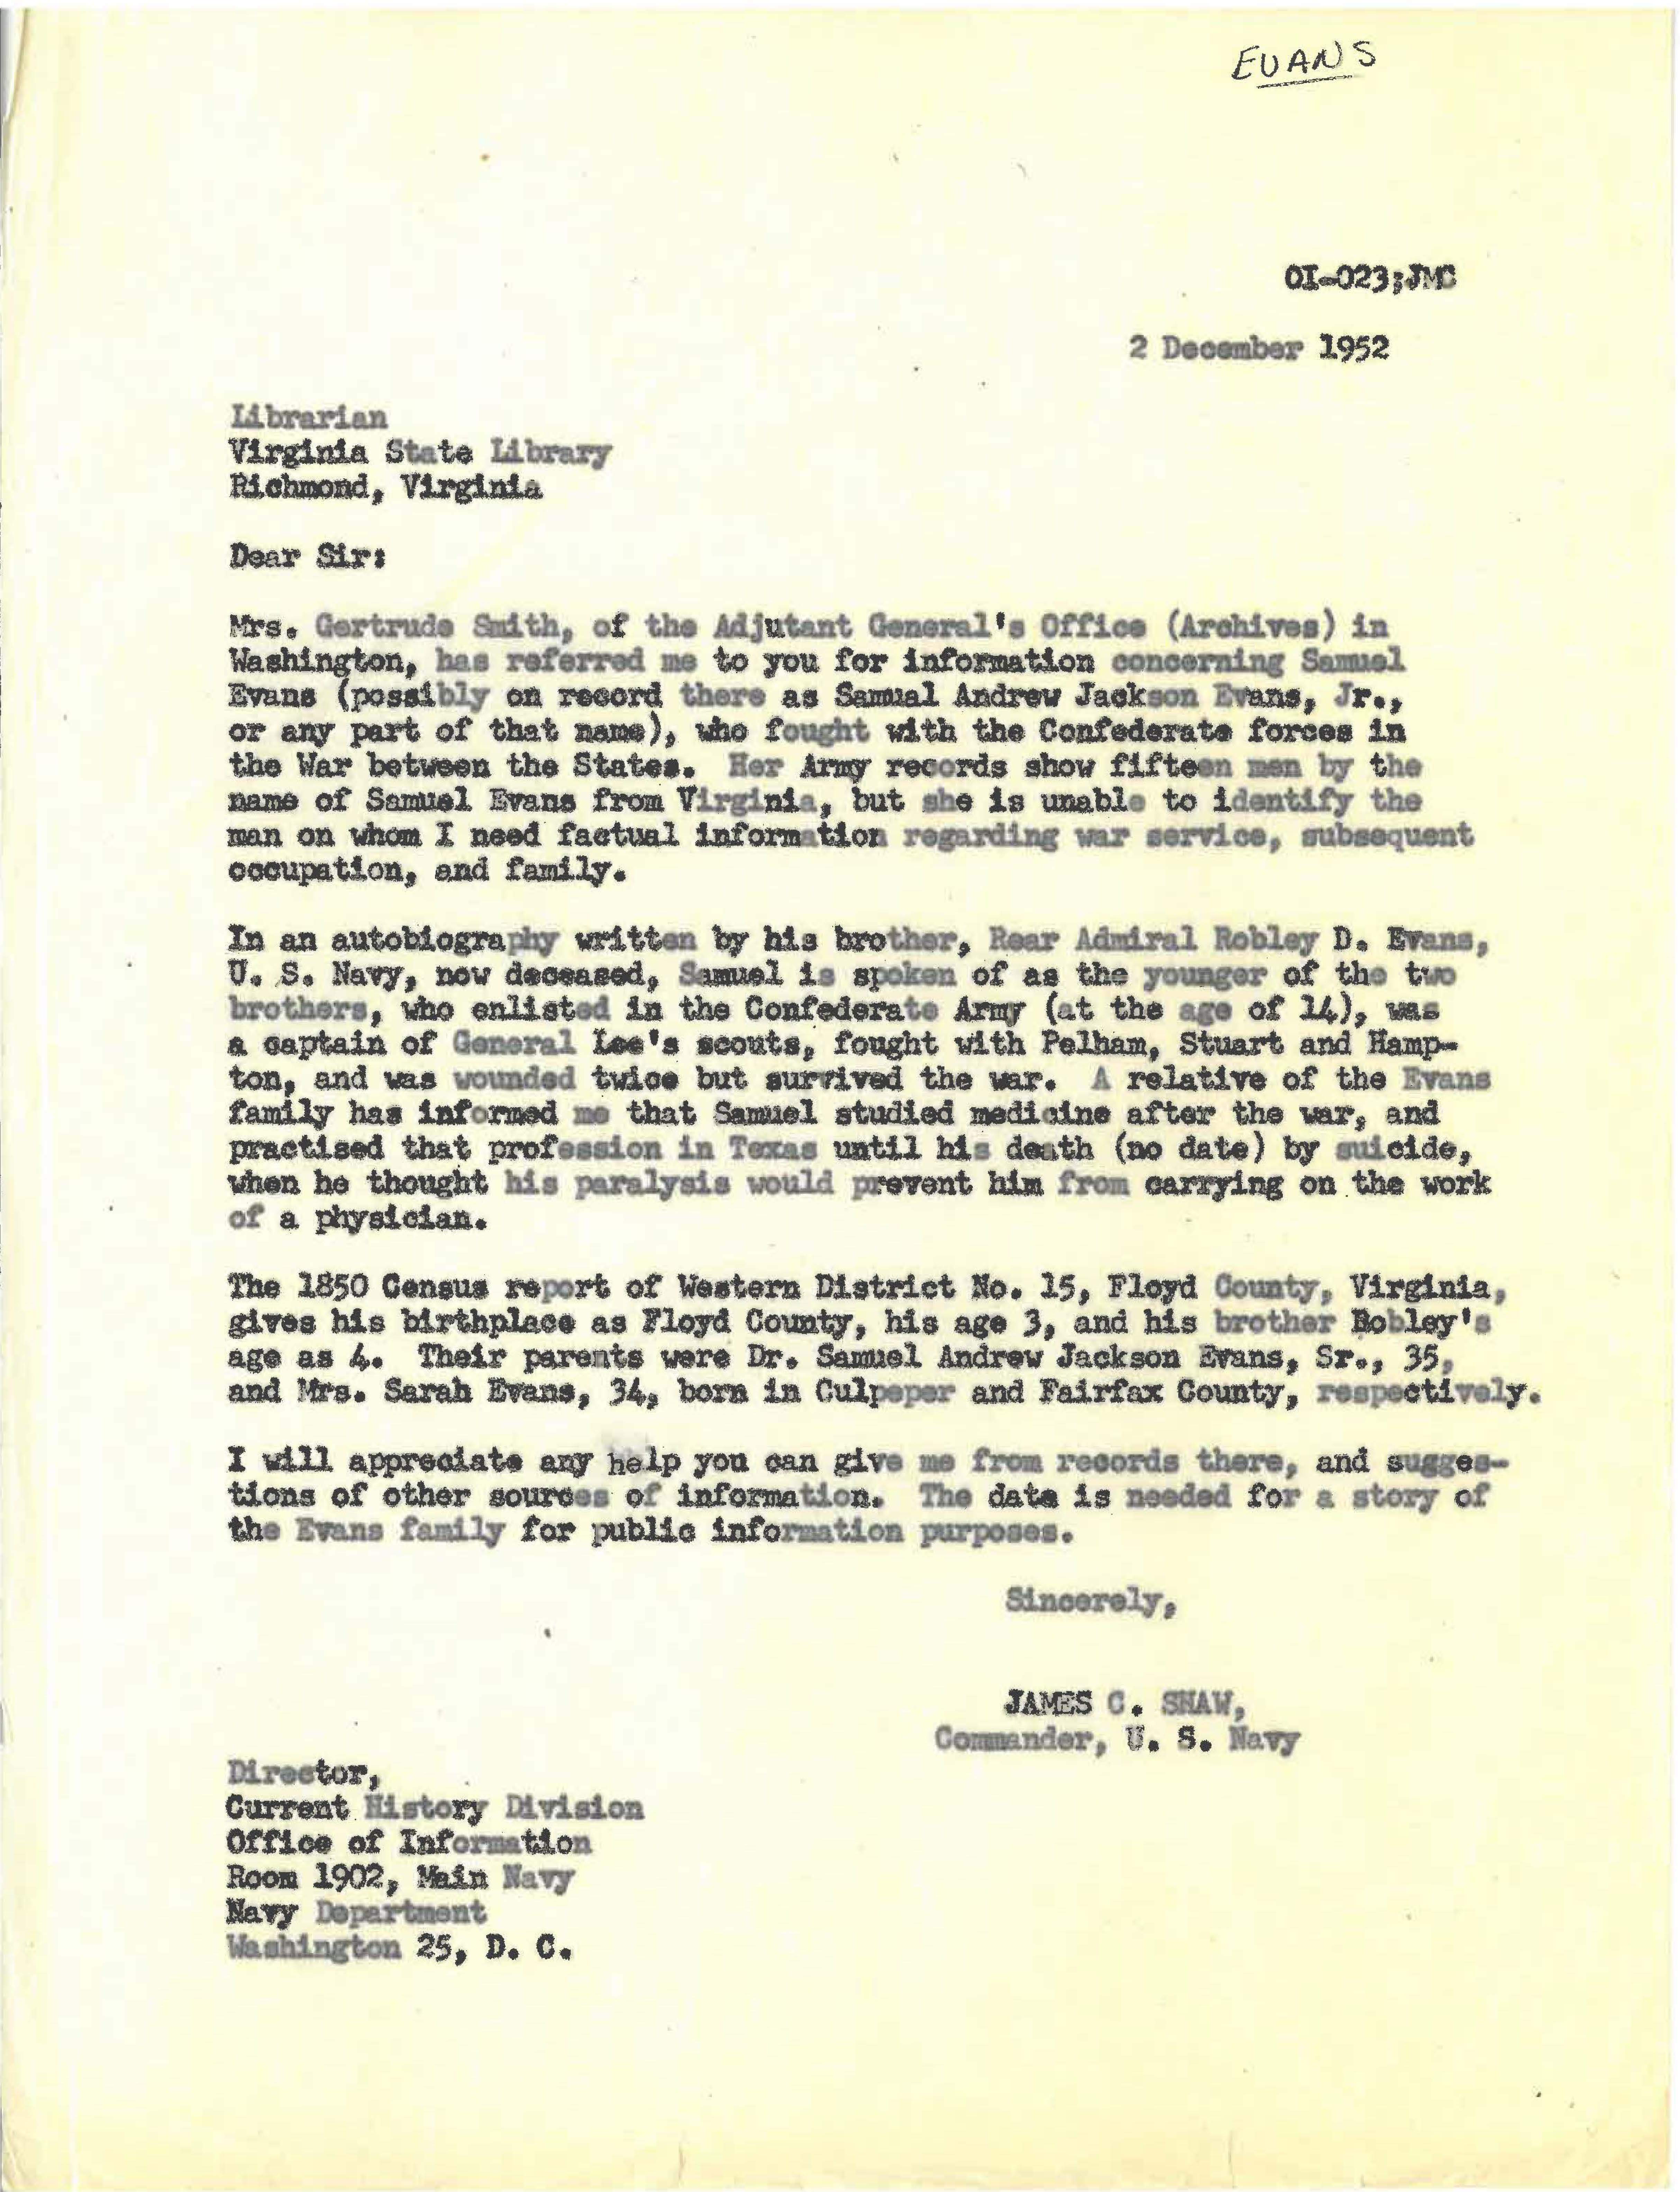 Shaw letter to Virginia State Library